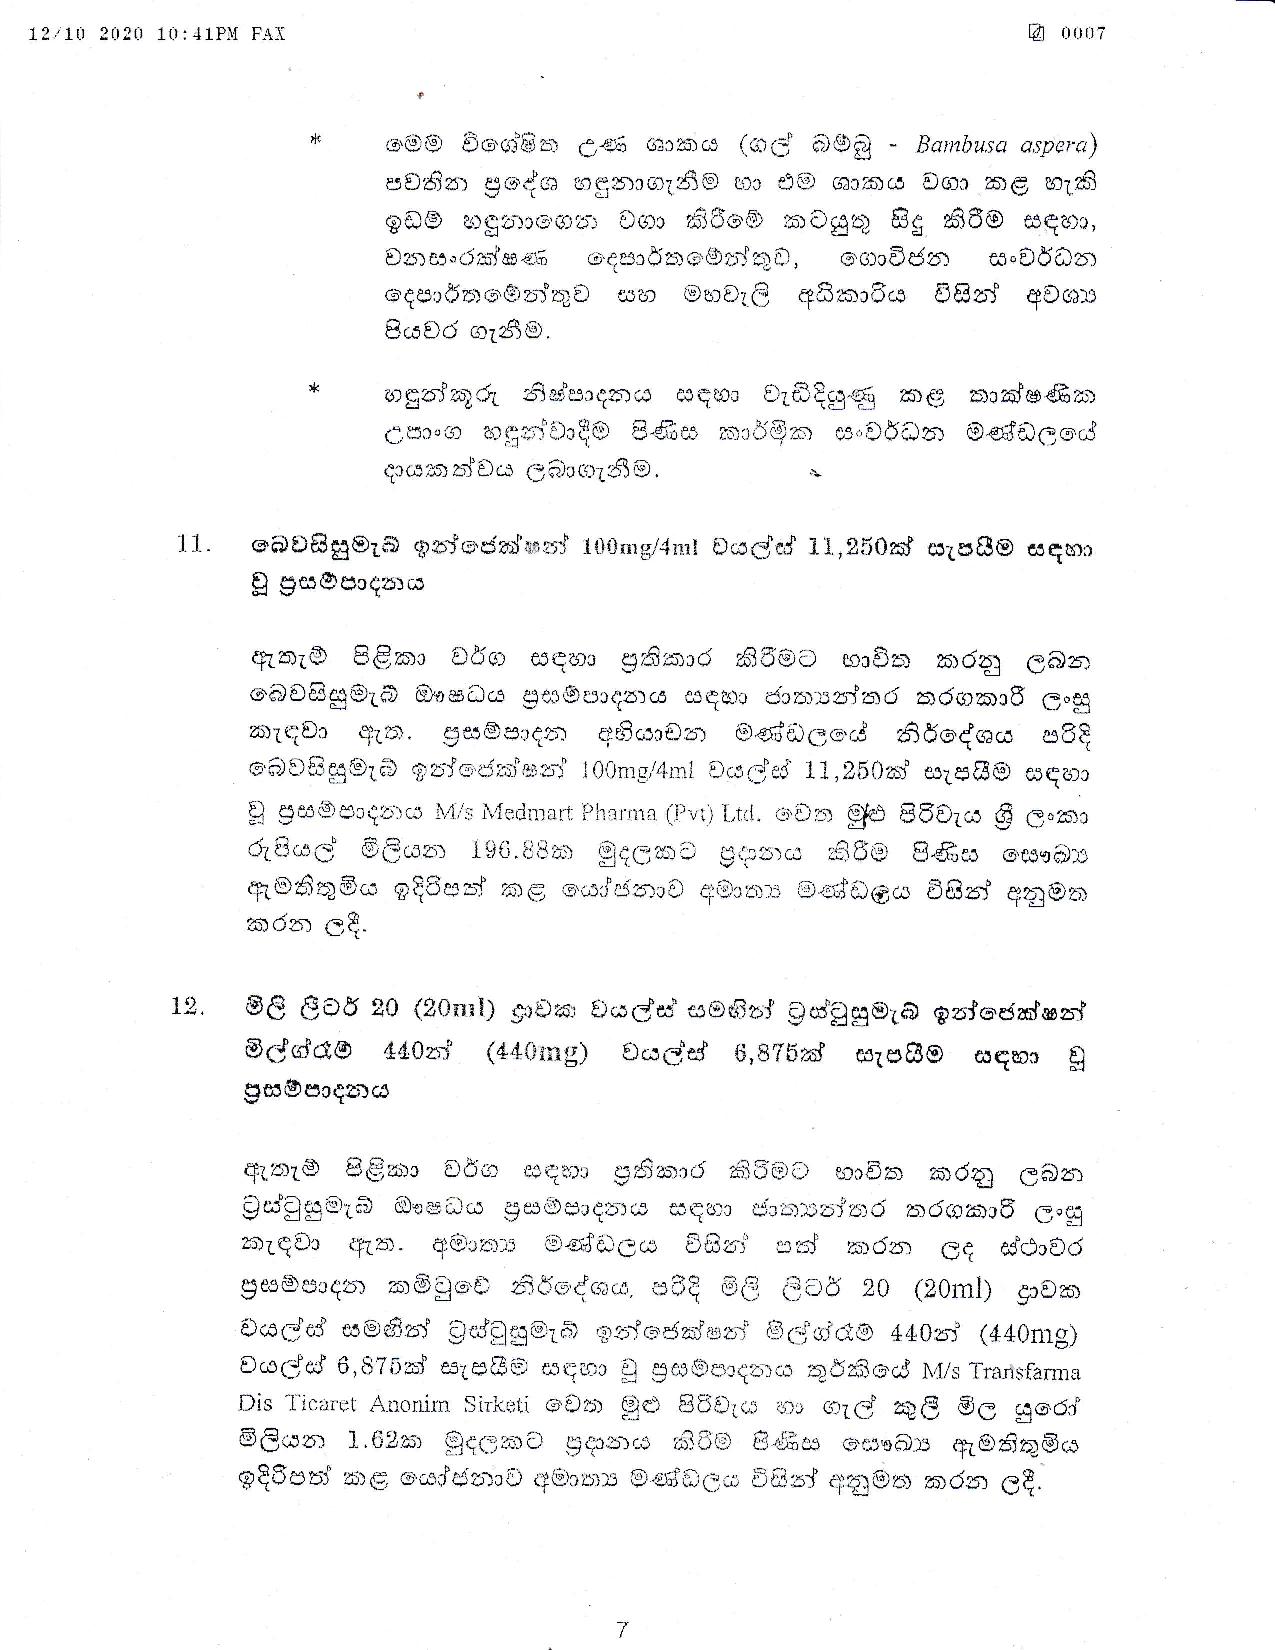 Cabinet Decision on 12.10.2020 page 007